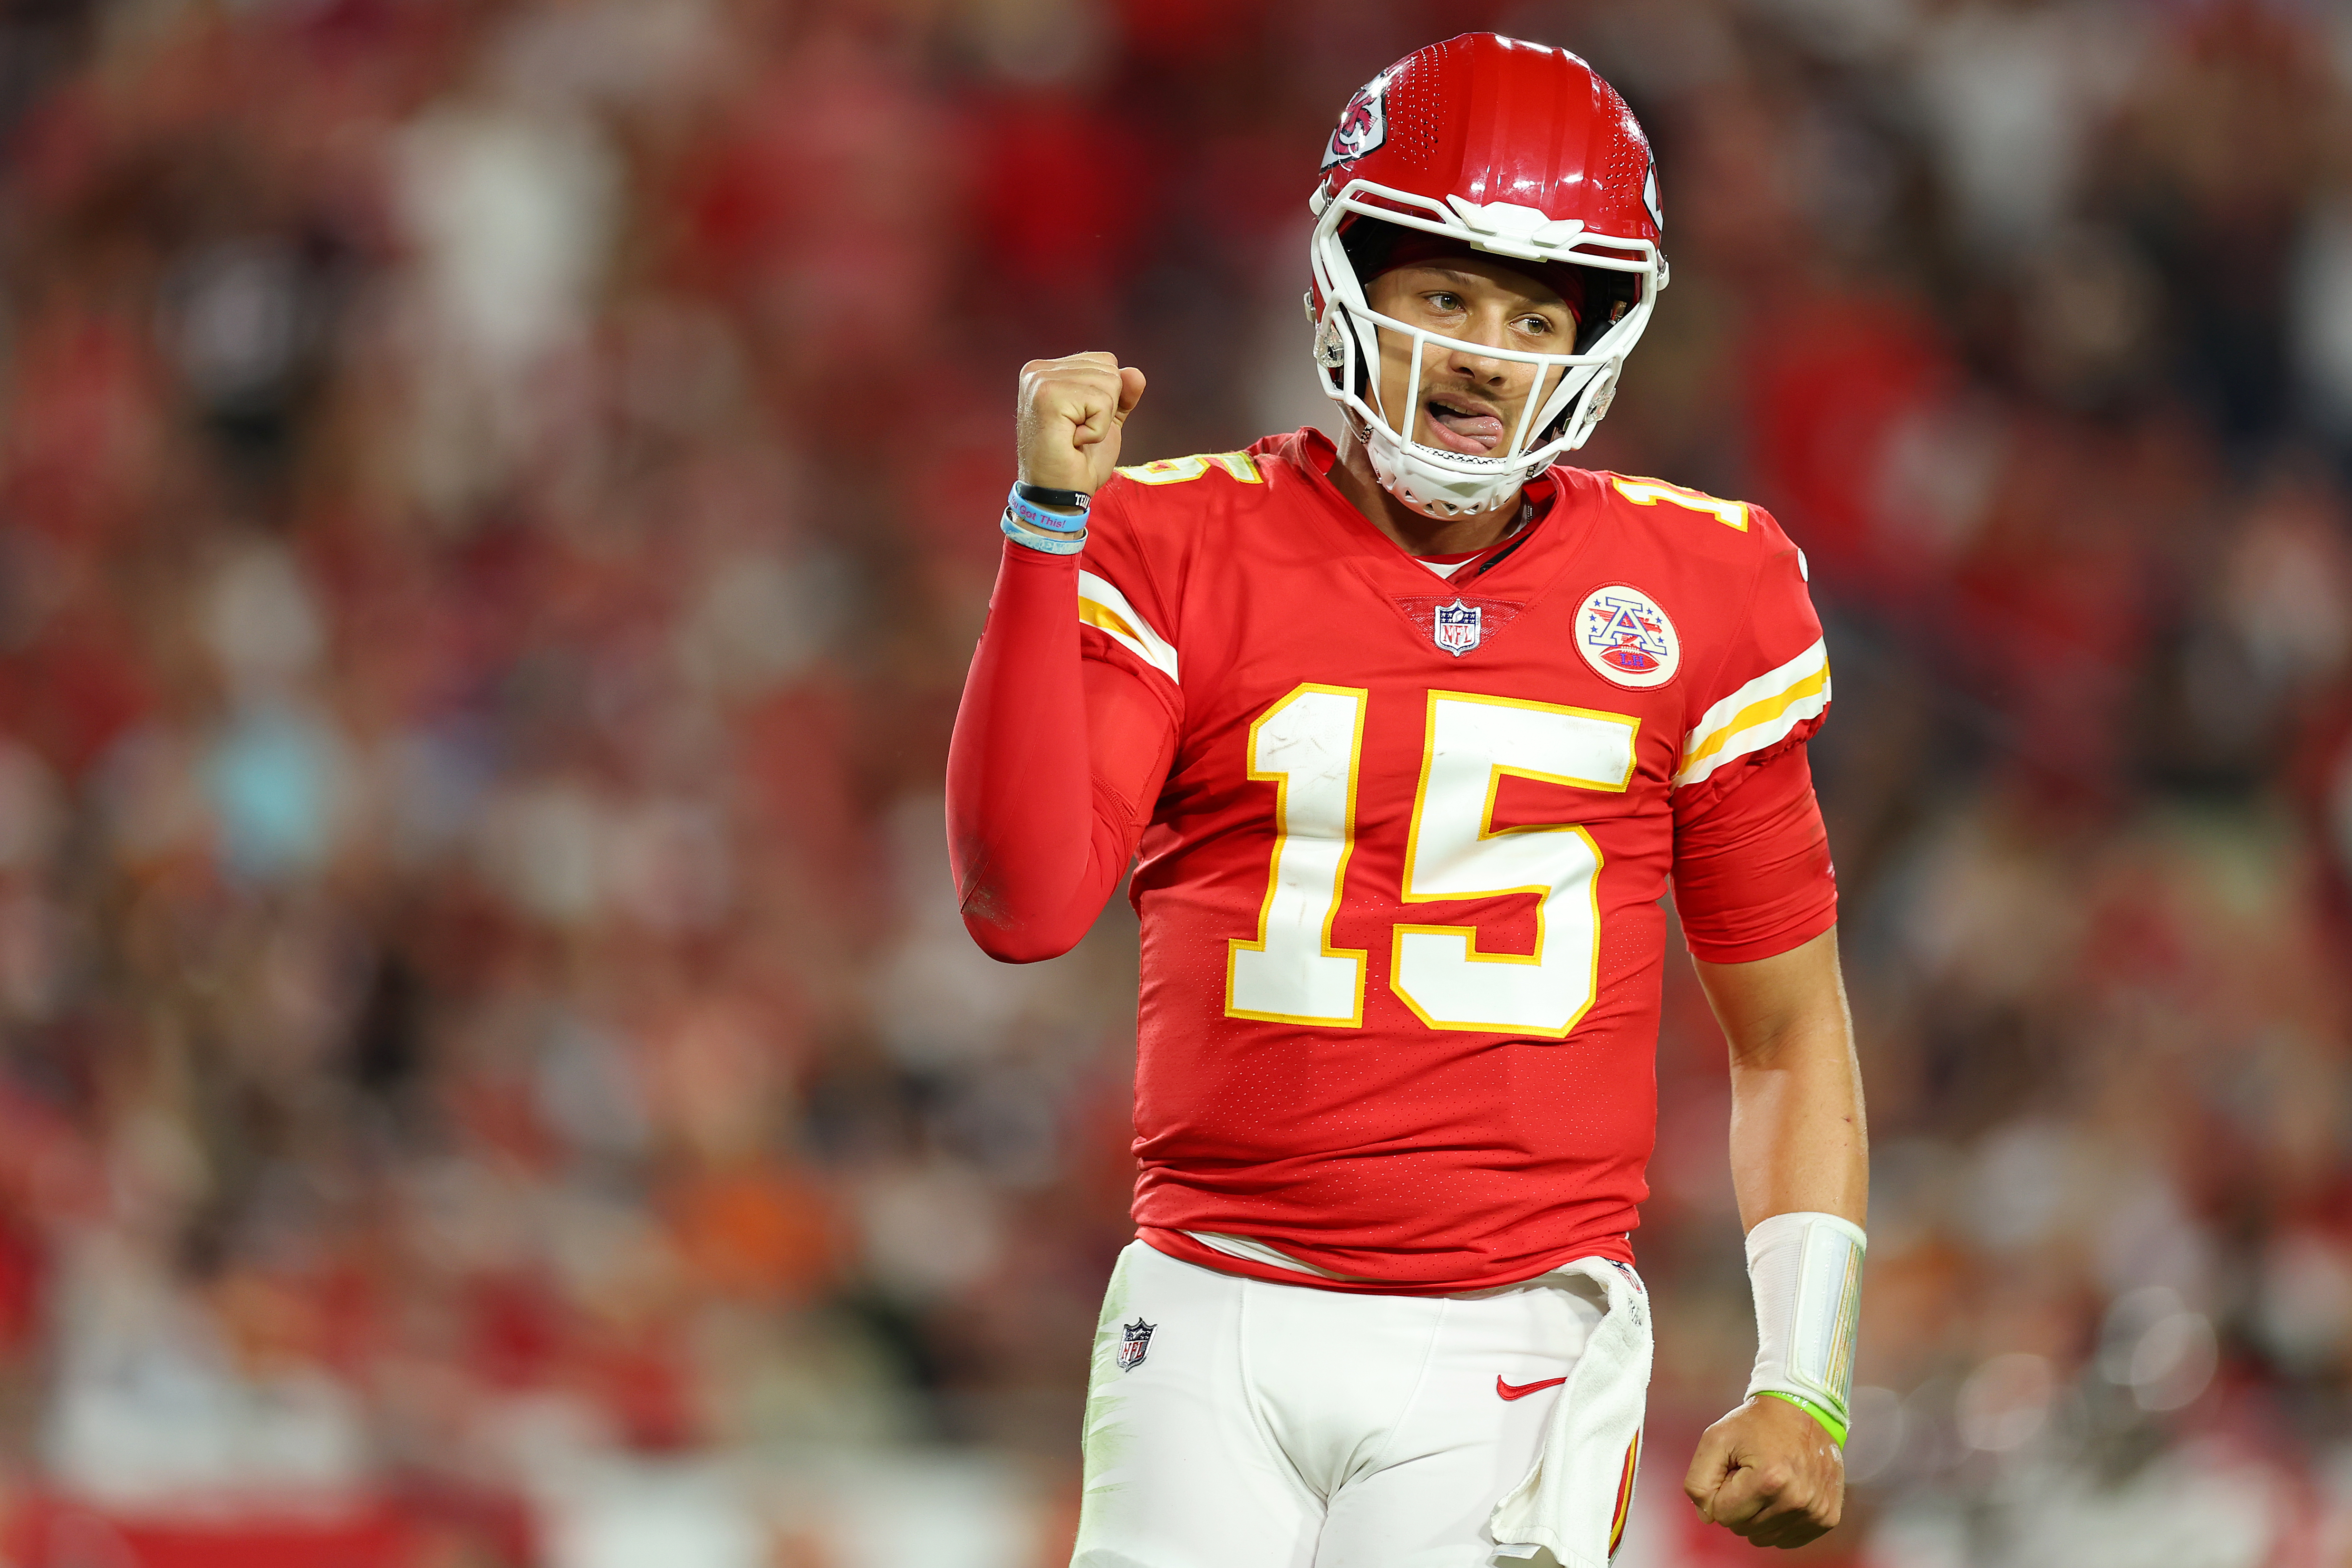 Mahomes has three Super Bowl titles as well as plenty of business ventures on his resume